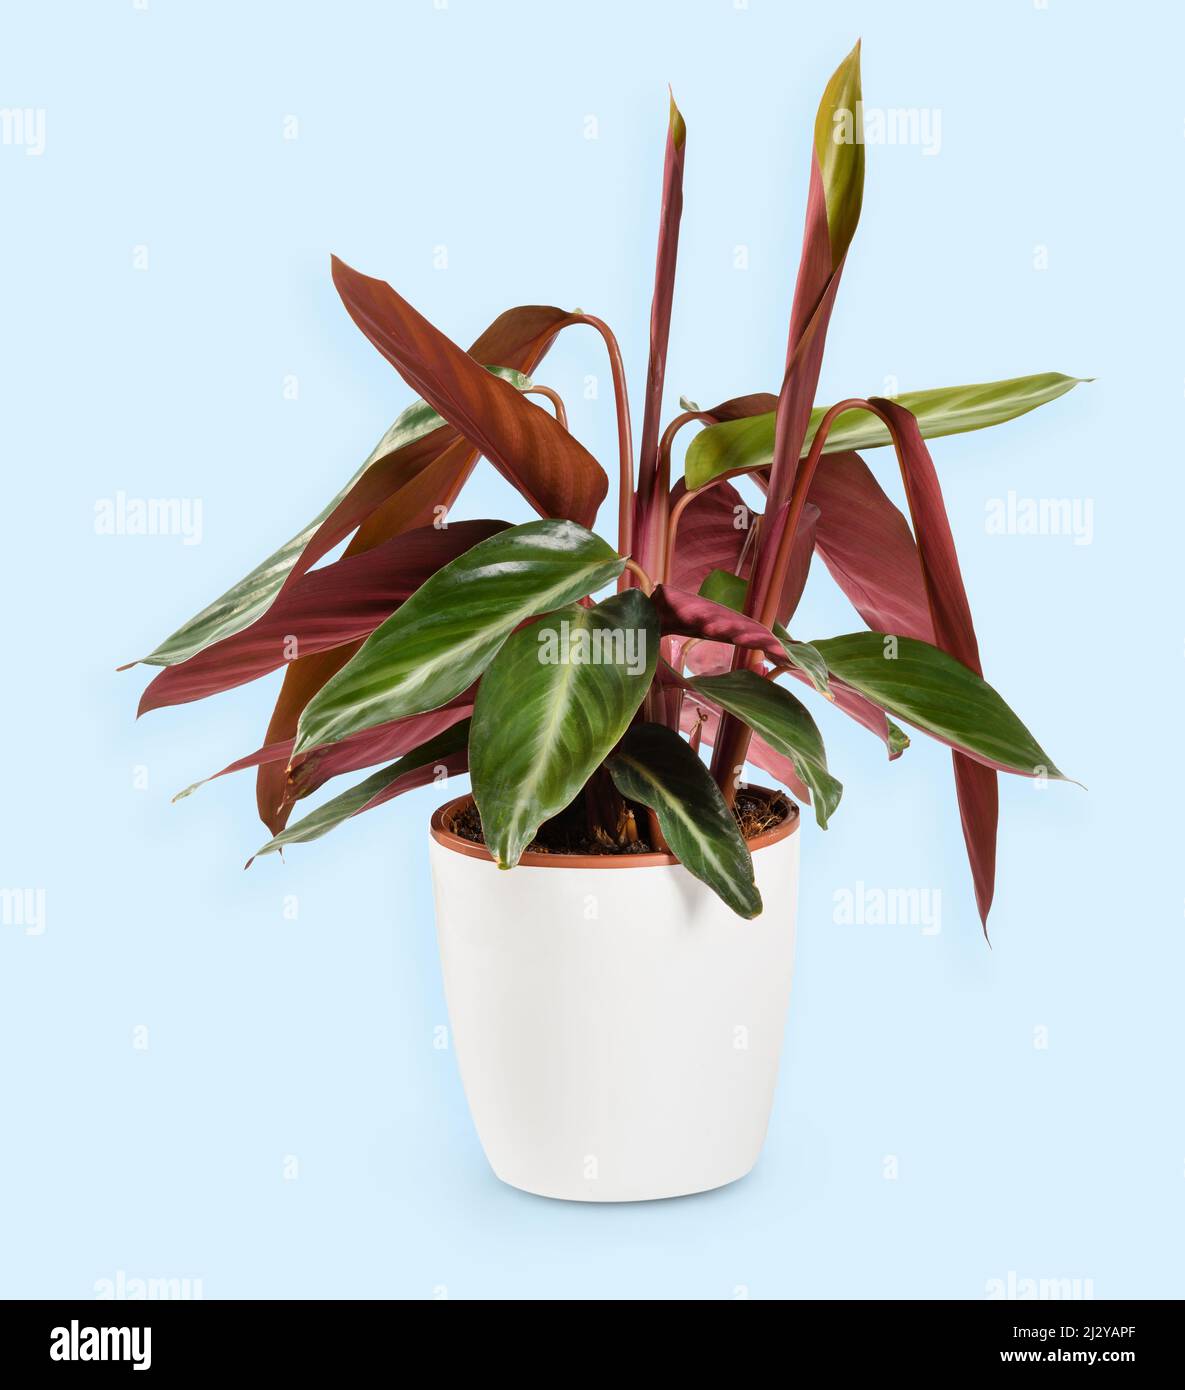 White pot with Calathea triostar plant with long green and burgundy leaves on light blue background Stock Photo